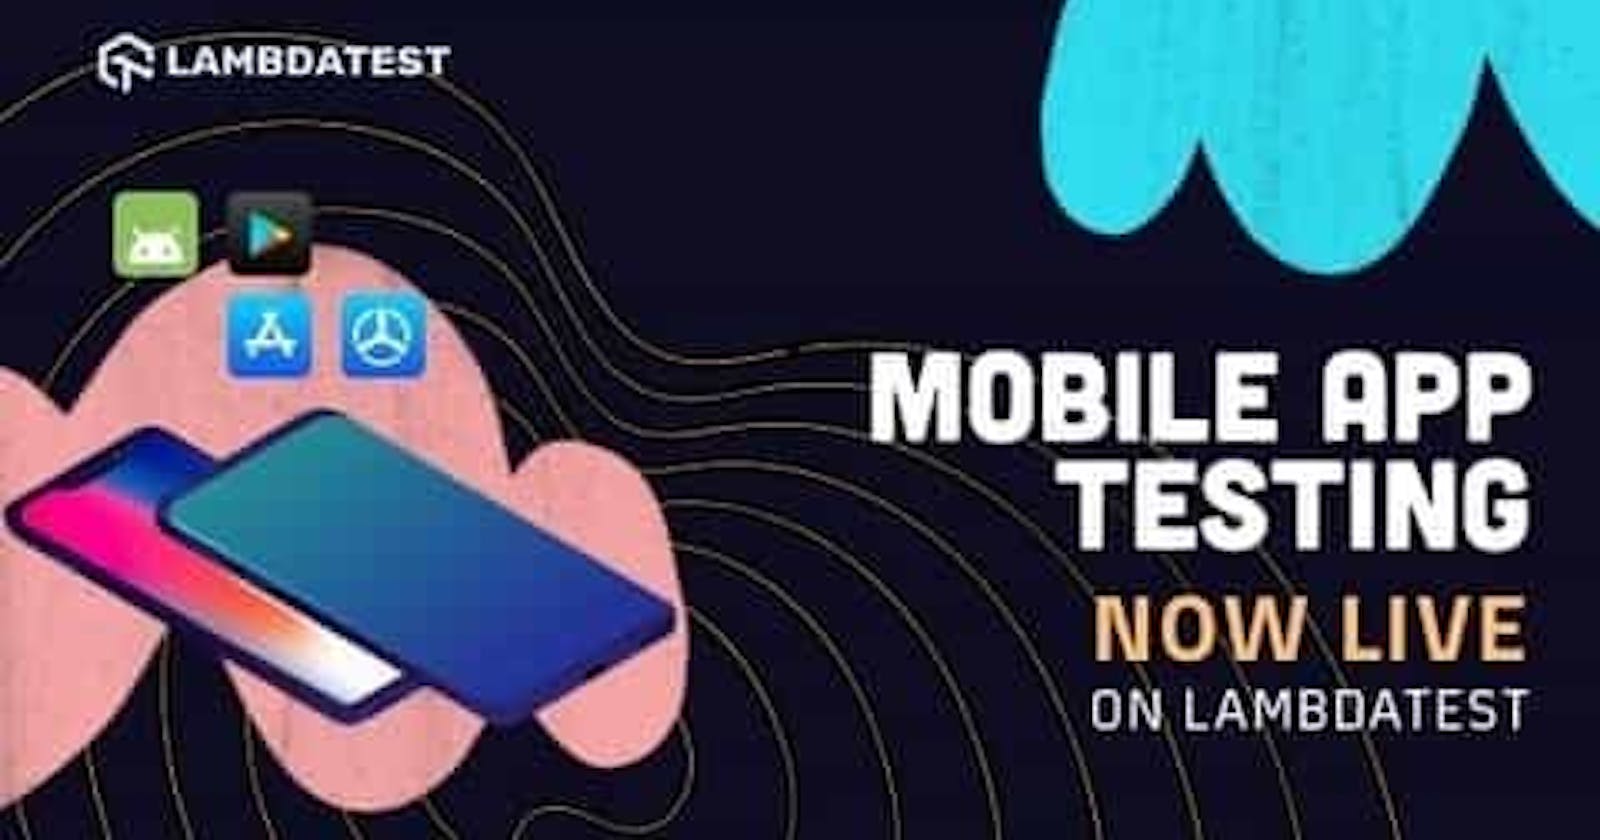 Mobile App Testing is Now LIVE On LambdaTest!